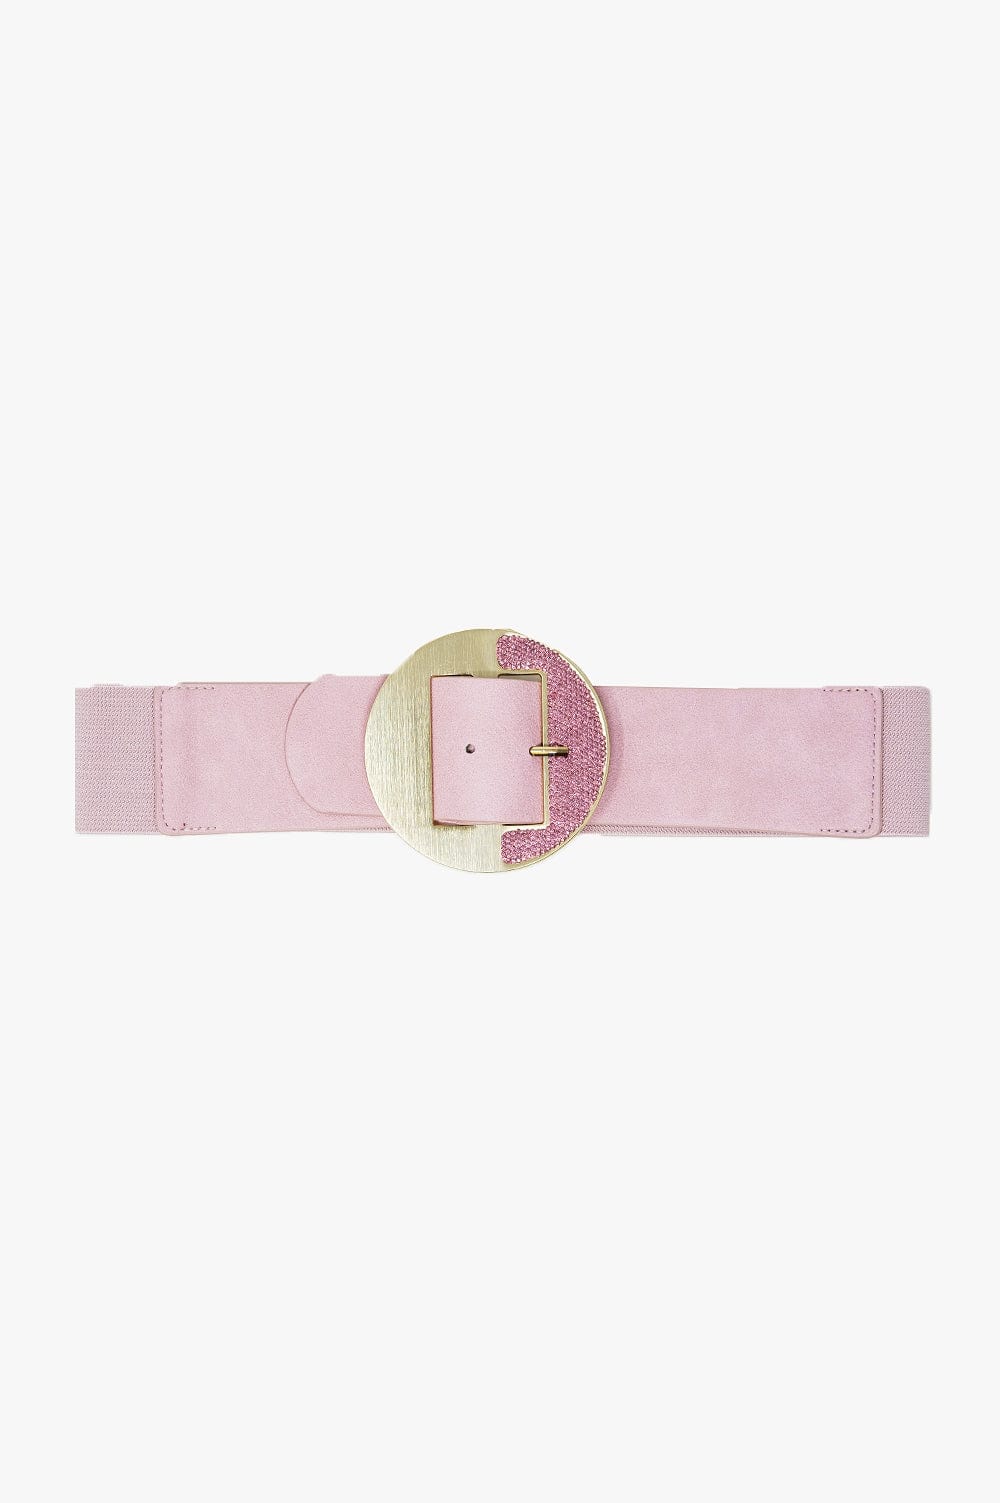 Q2 Women's Belt One Size / Pink Pink Belt With Adjustable Gold Buckle